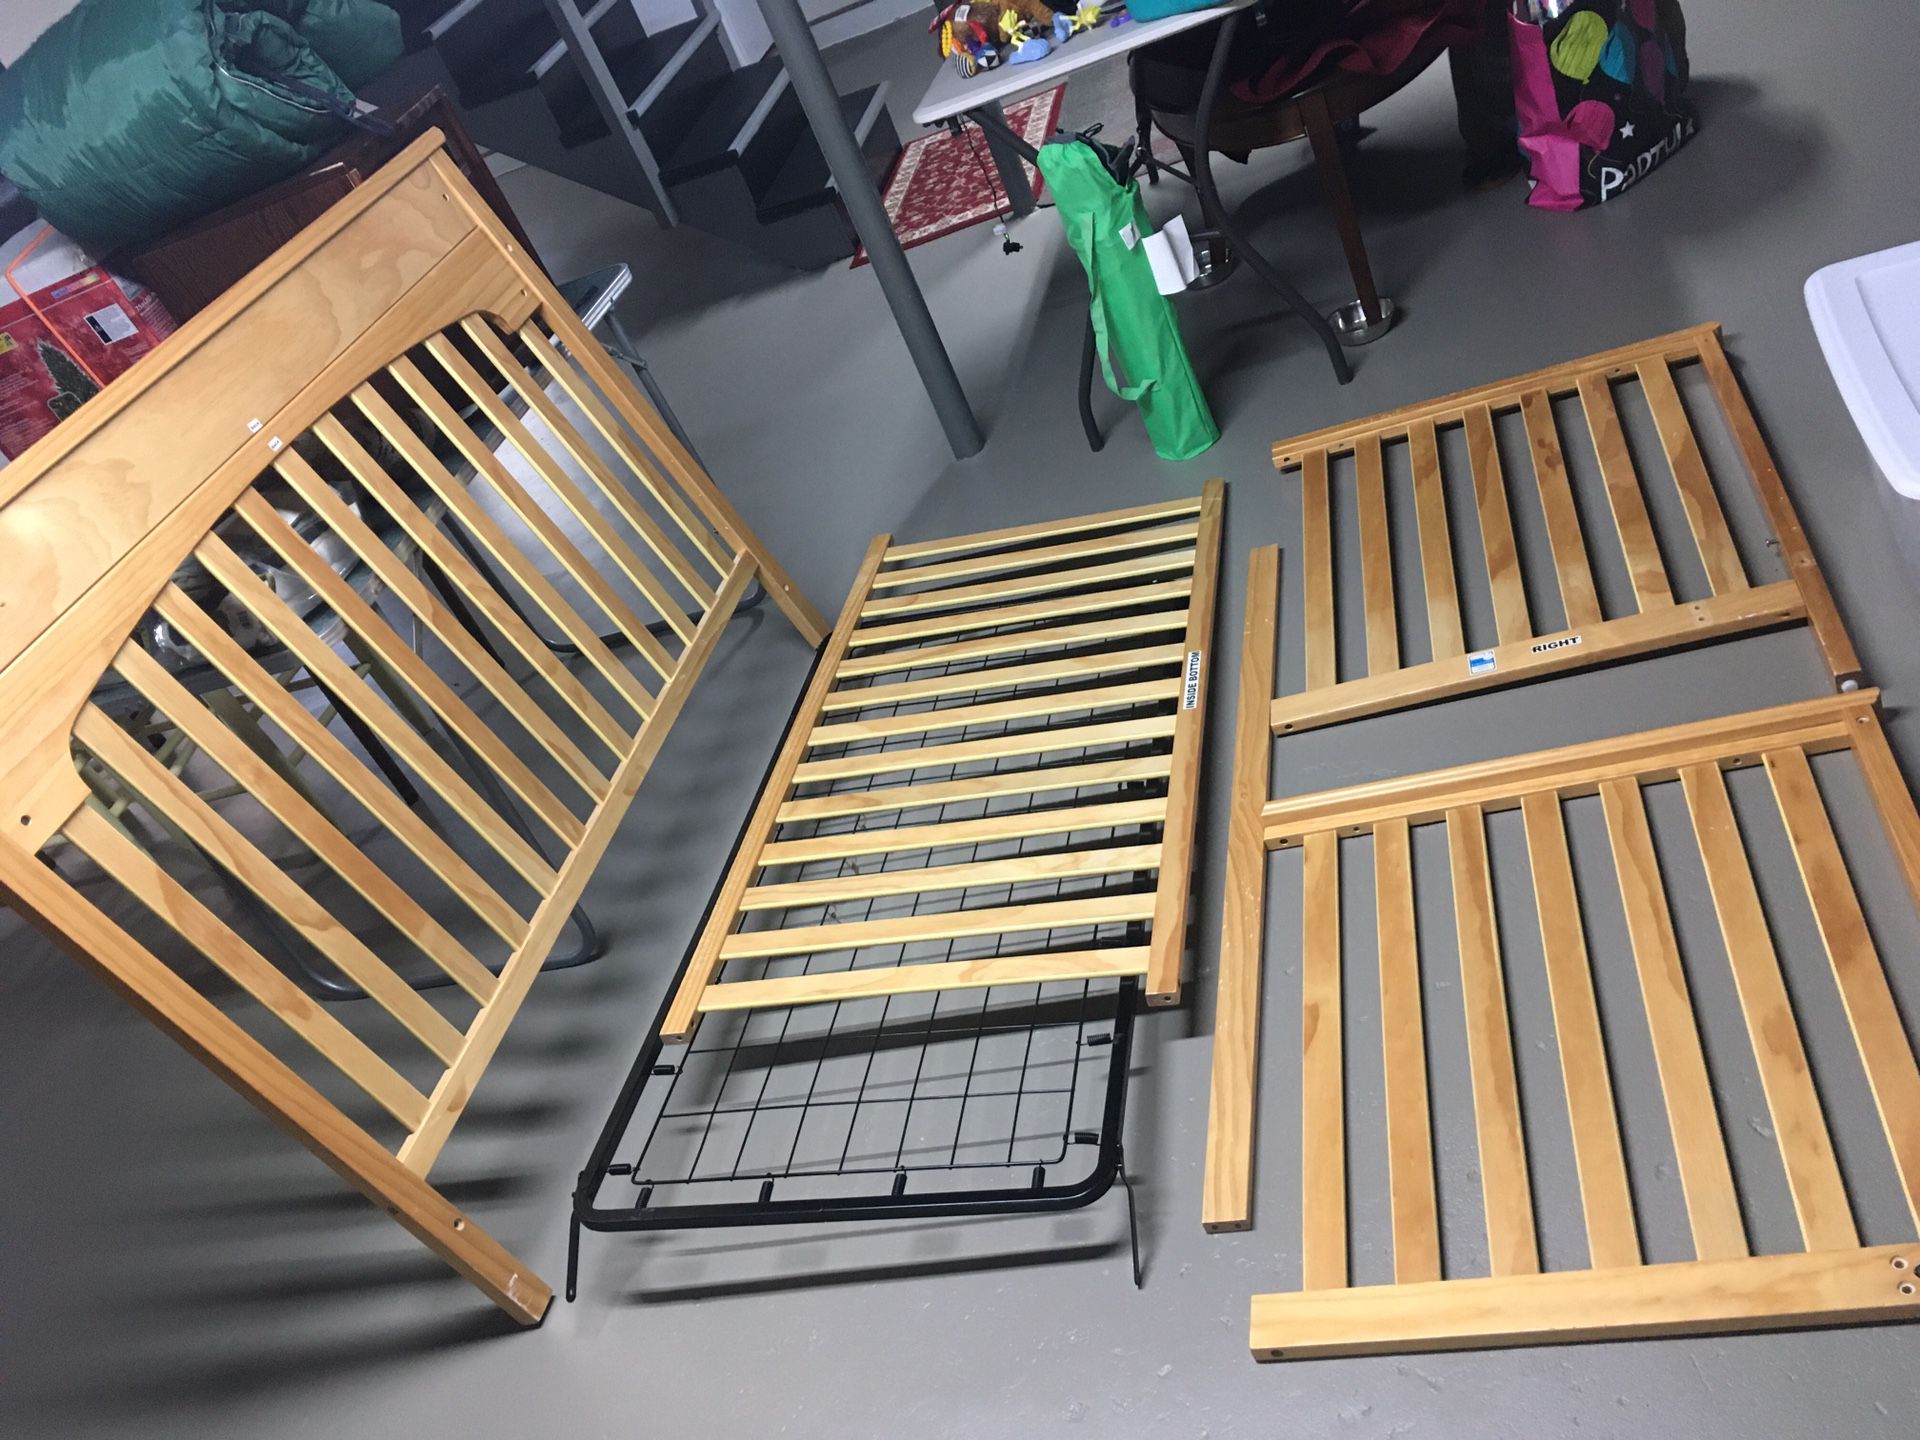 SALE ITEM: Graco Infant/Toddler Bed And Changing Table